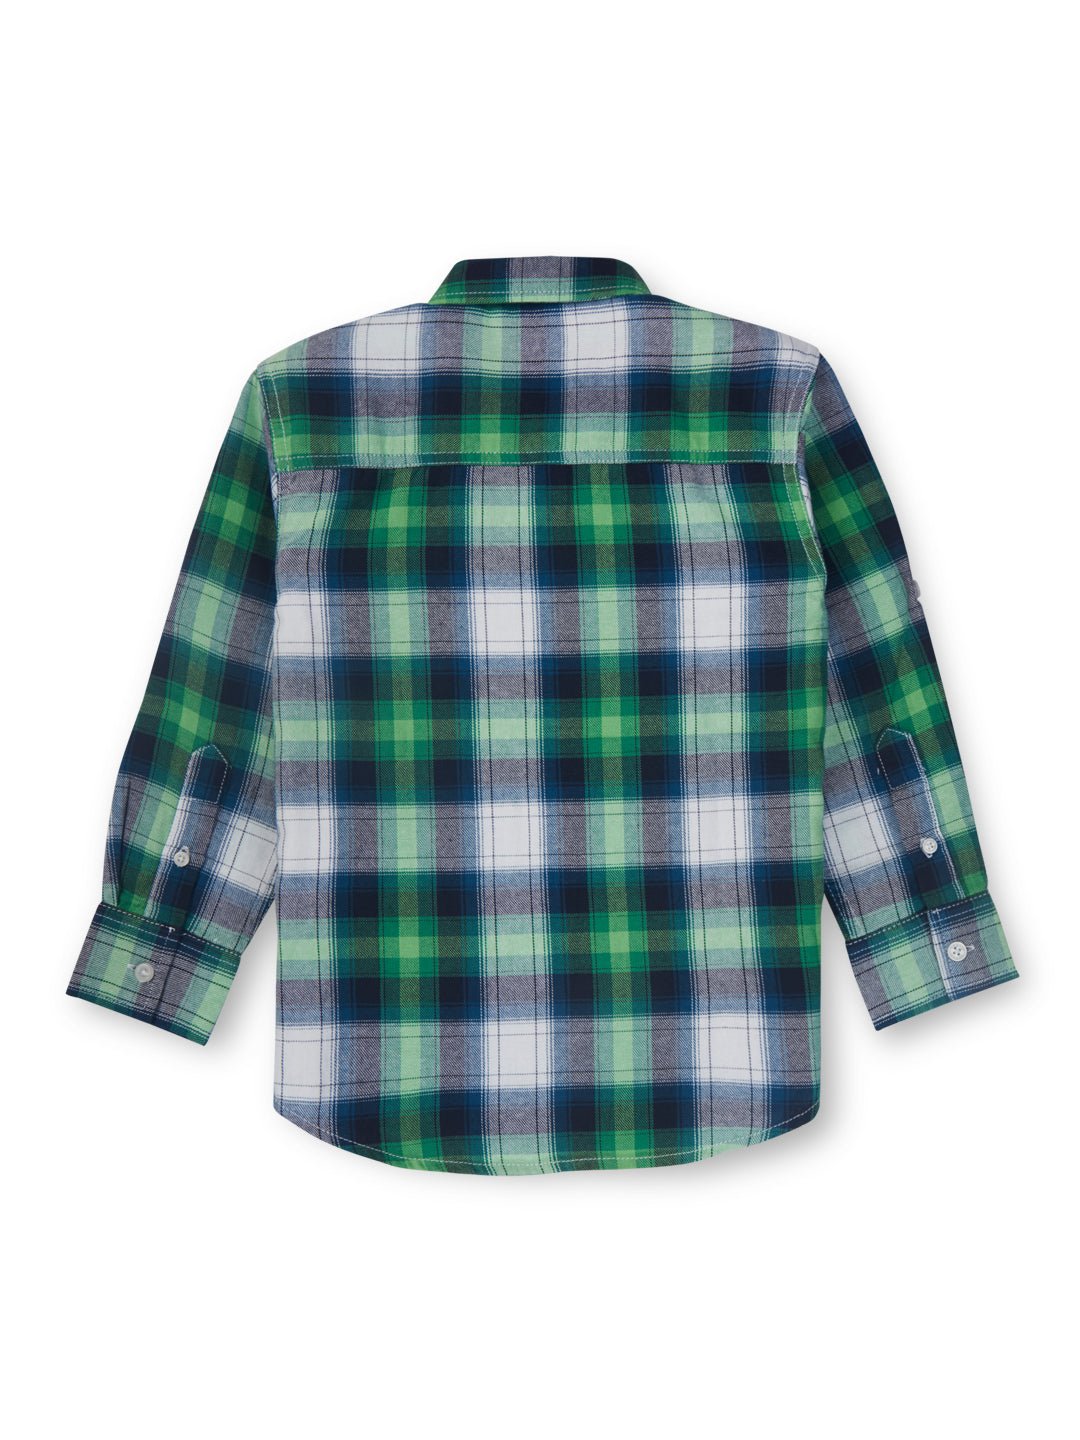 Boys blue green woven checkered full sleeve shirt with hoodie